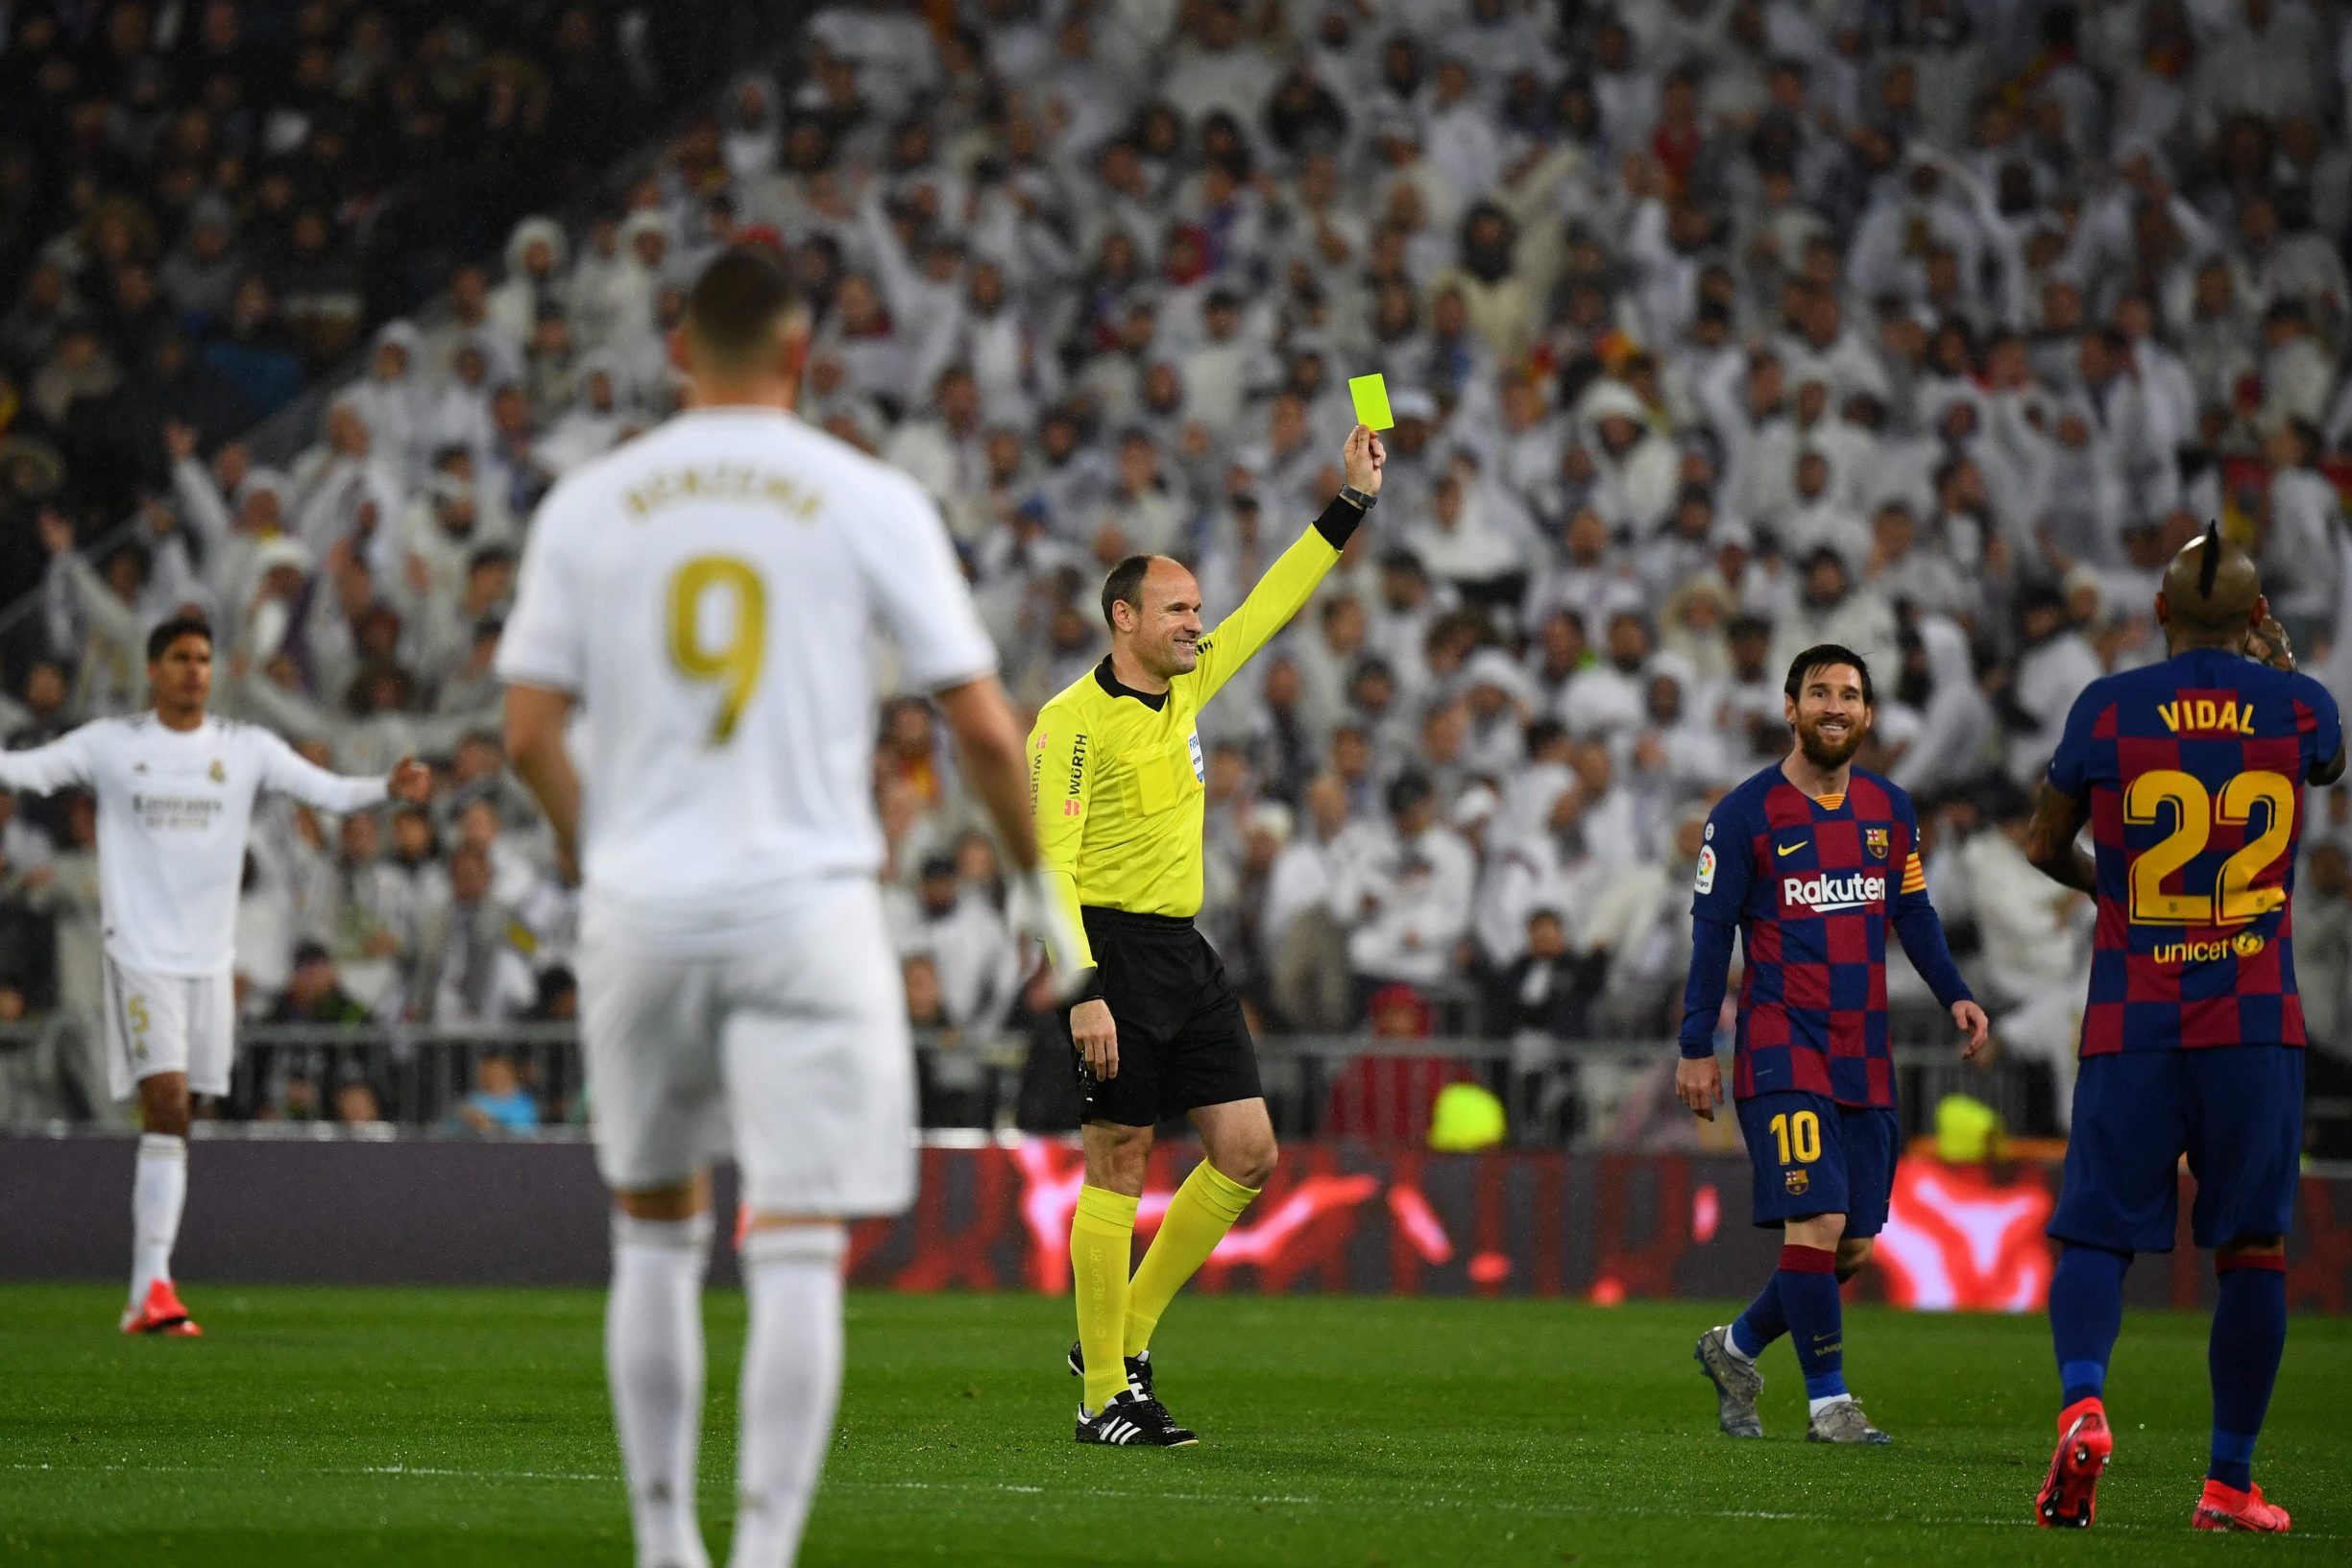 Barcelona's Argentine forward Lionel Messi (R) laughs as Spanish referee Antonio Miguel Mateu Lahoz (C) shows a yellow card to Real Madrid's Brazilian forward Vinicius Junior (not seen) during the Spanish League football match between Real Madrid and Barcelona at the Santiago Bernabeu stadium in Madrid on March 1, 2020. (Photo by GABRIEL BOUYS / AFP)